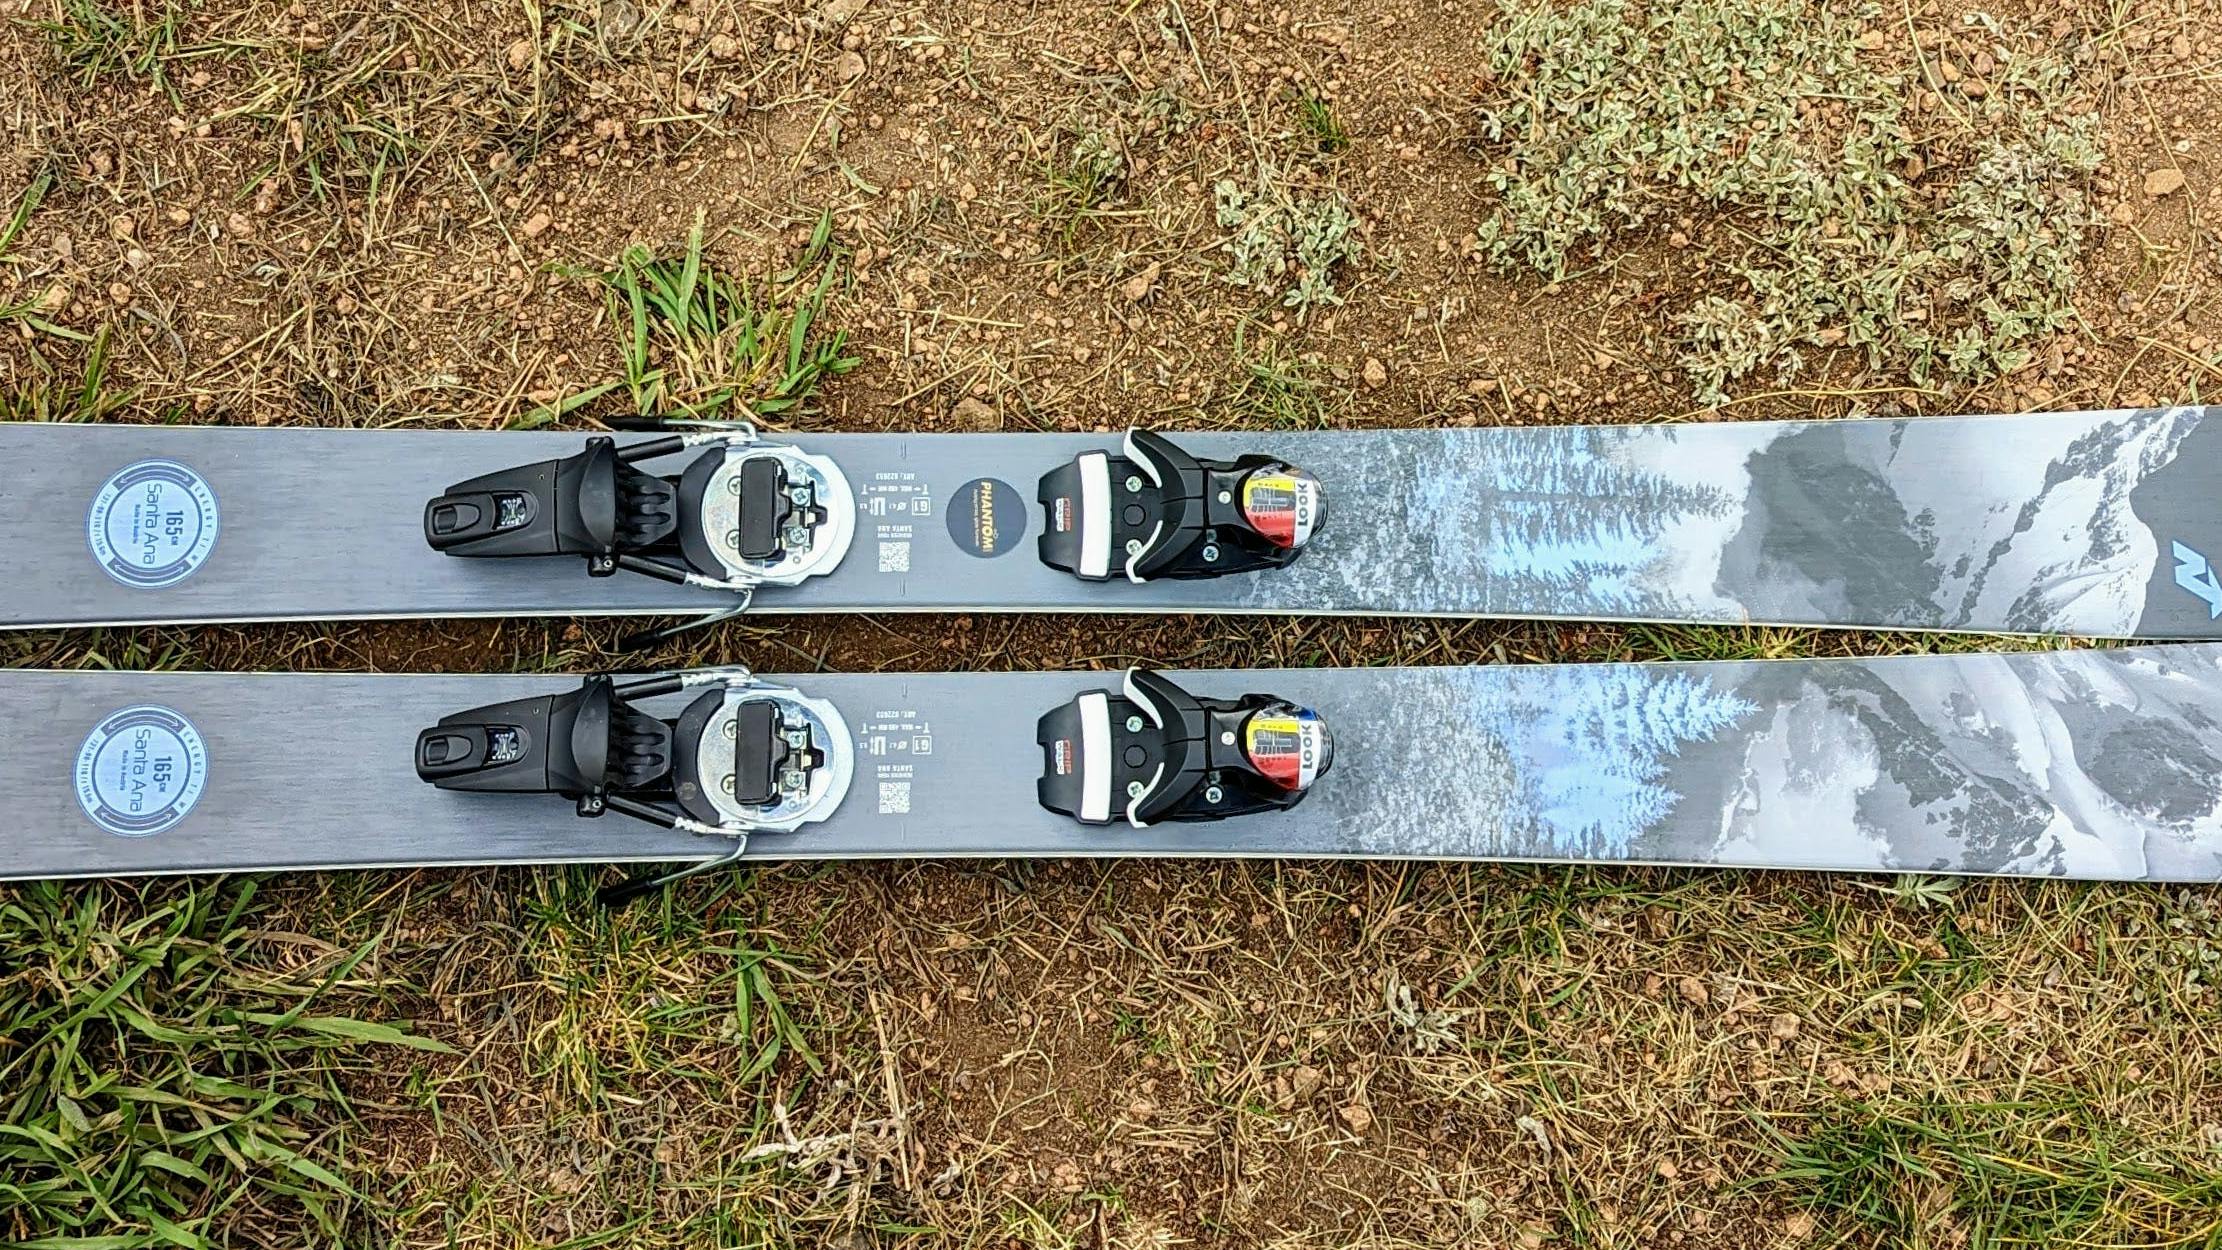 Top down view of the Nordica Santa ANA 98 Women's Skis.